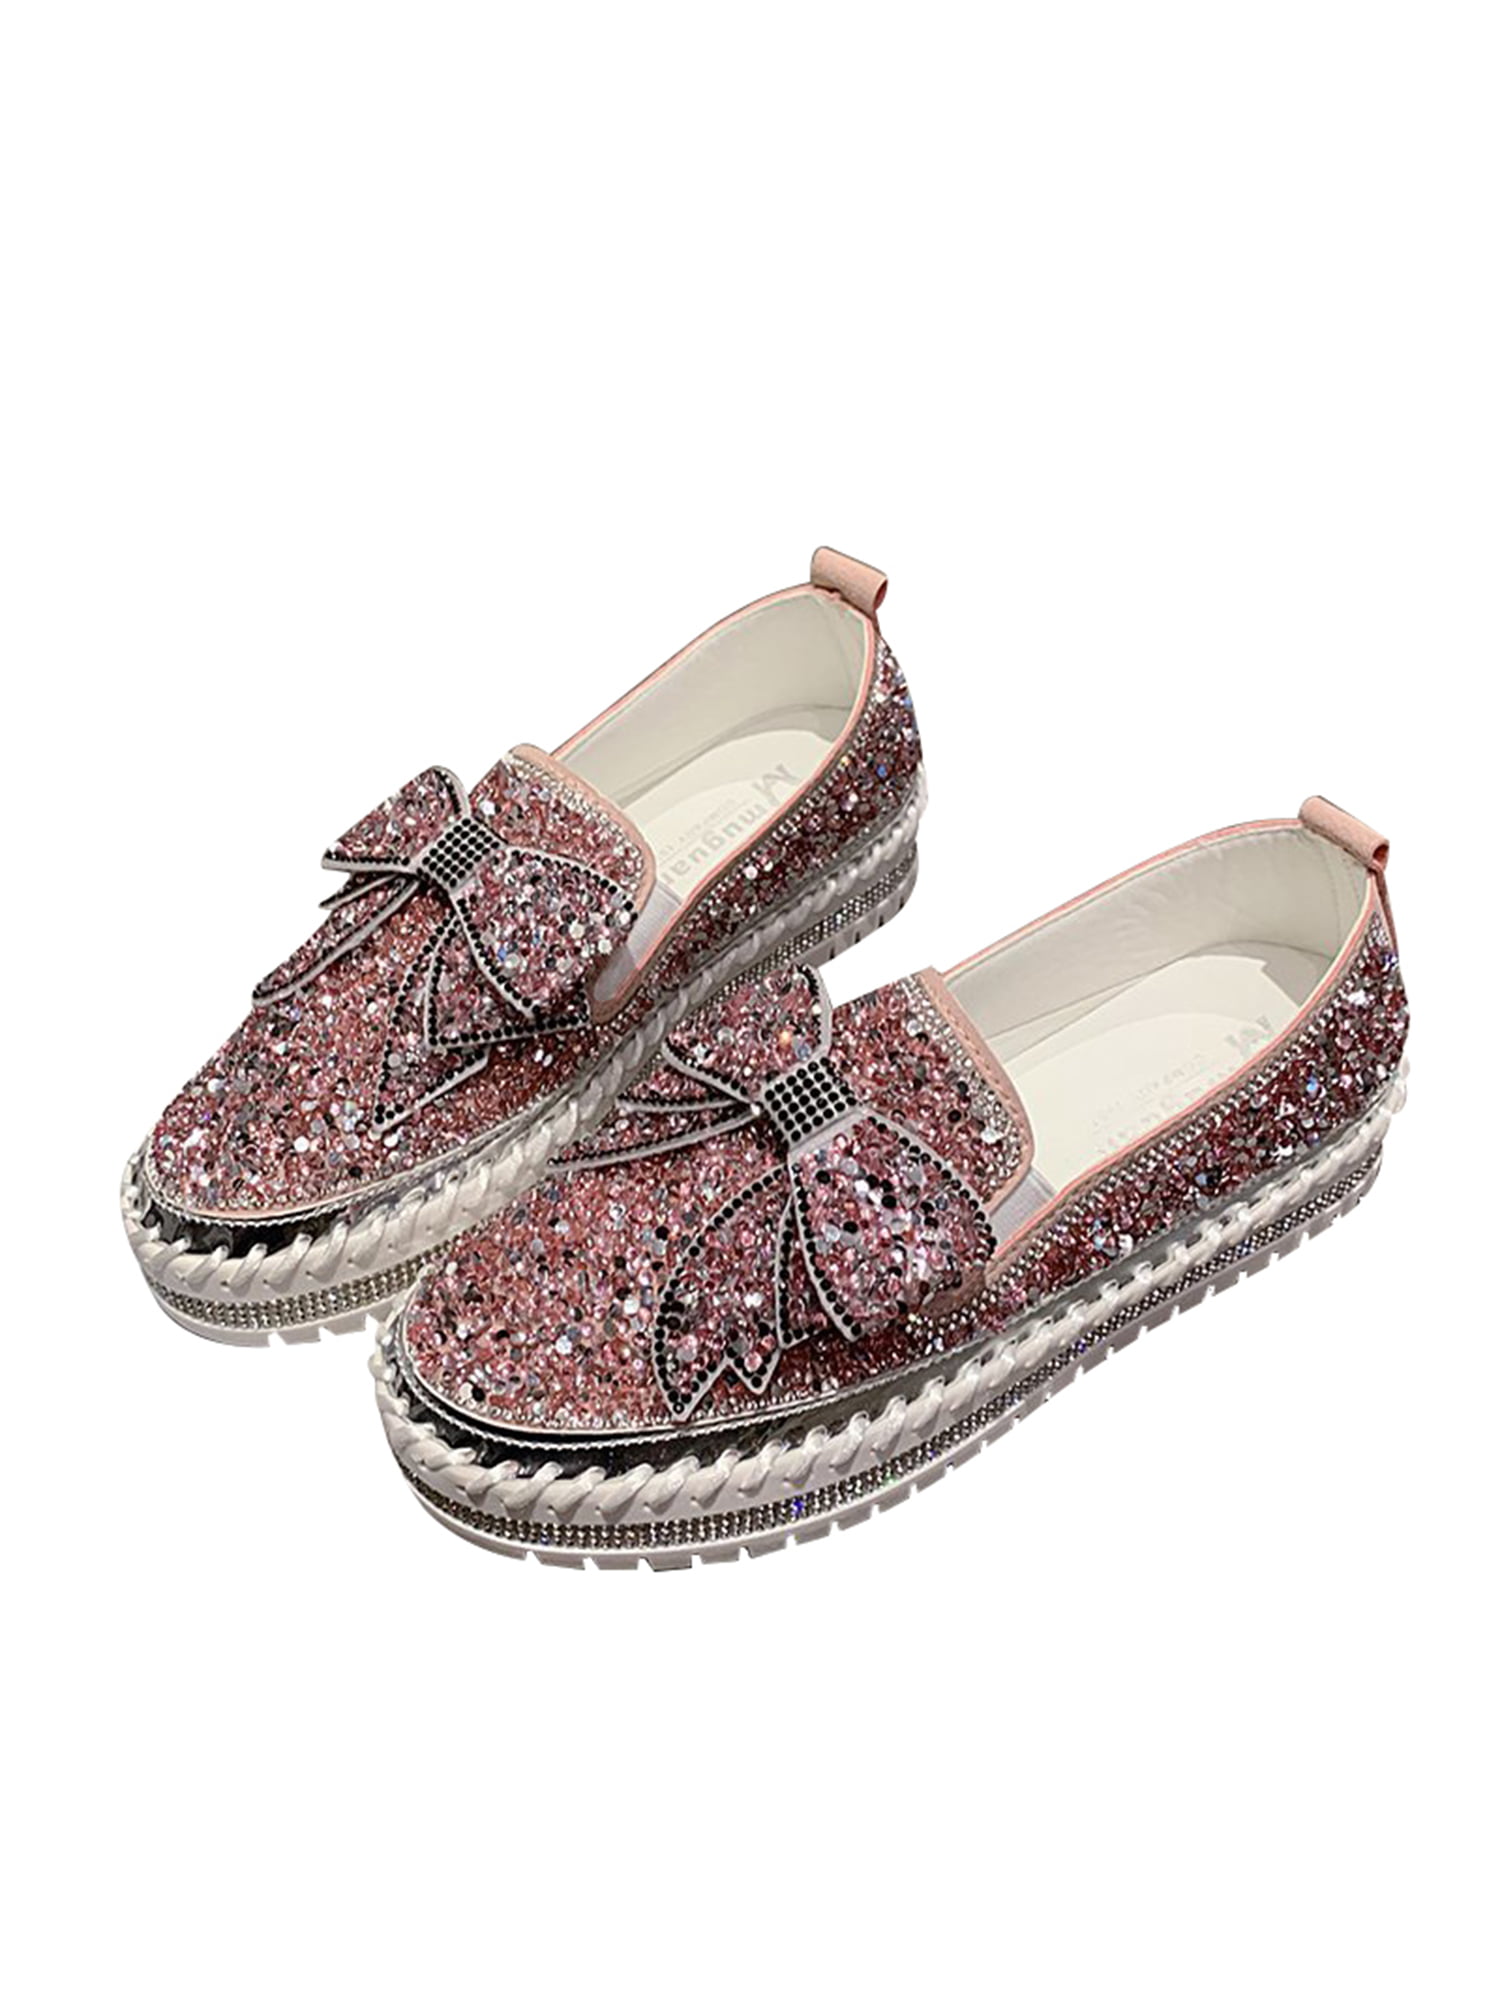 Womens Rhinestone Pointy Toe Shiny Pumps Slip On Loafers Flats Moccasin Shoes sz